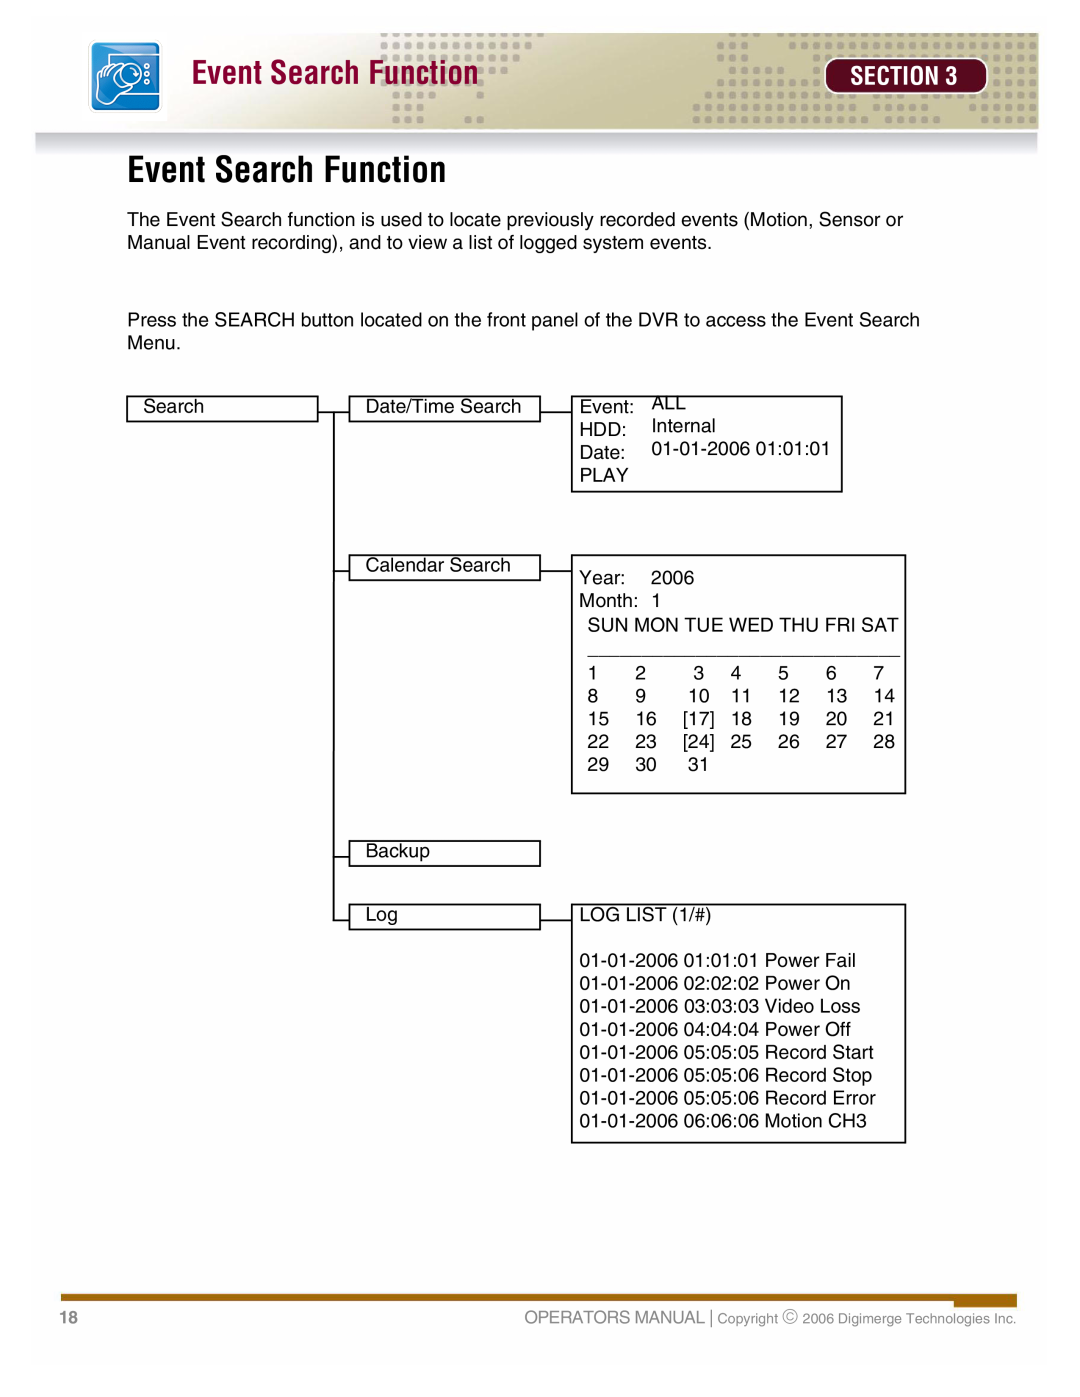 LOREX Technology DHU500 manual Event Search Function, Section 